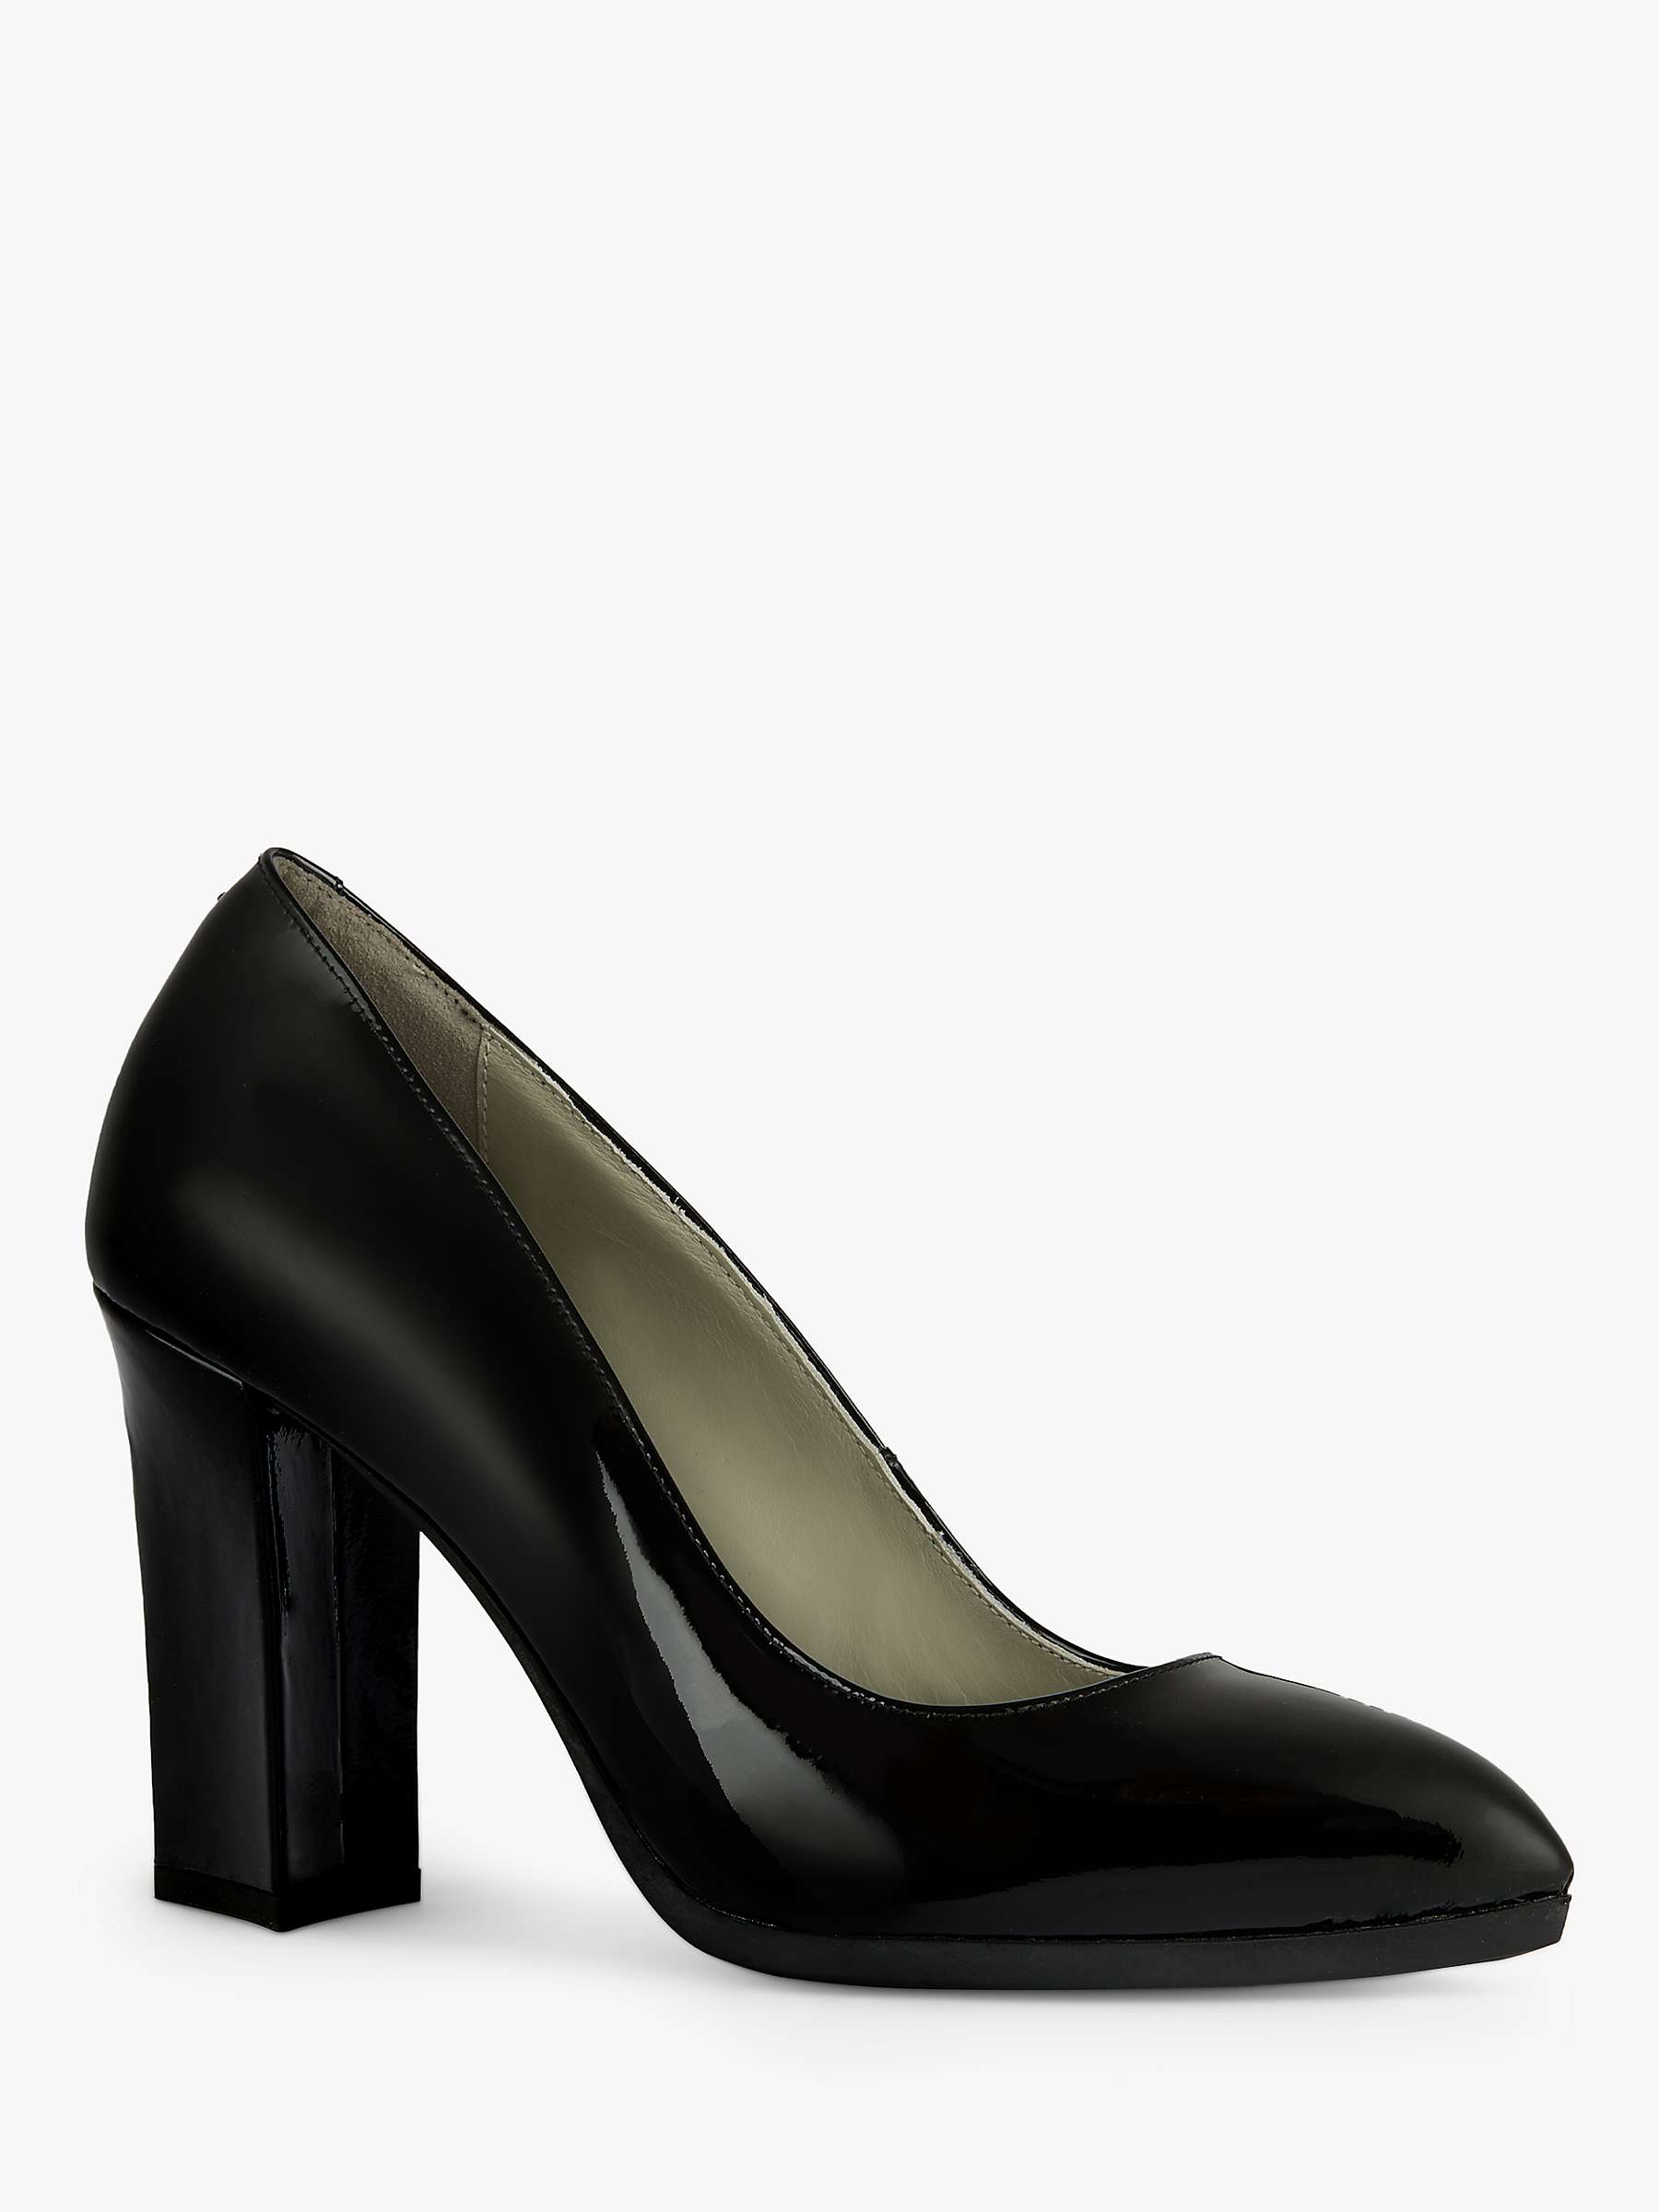 Buy Geox Walk Pleasure 90.1 Patent Leather Triangle Heel Court Shoes, Black Online at johnlewis.com